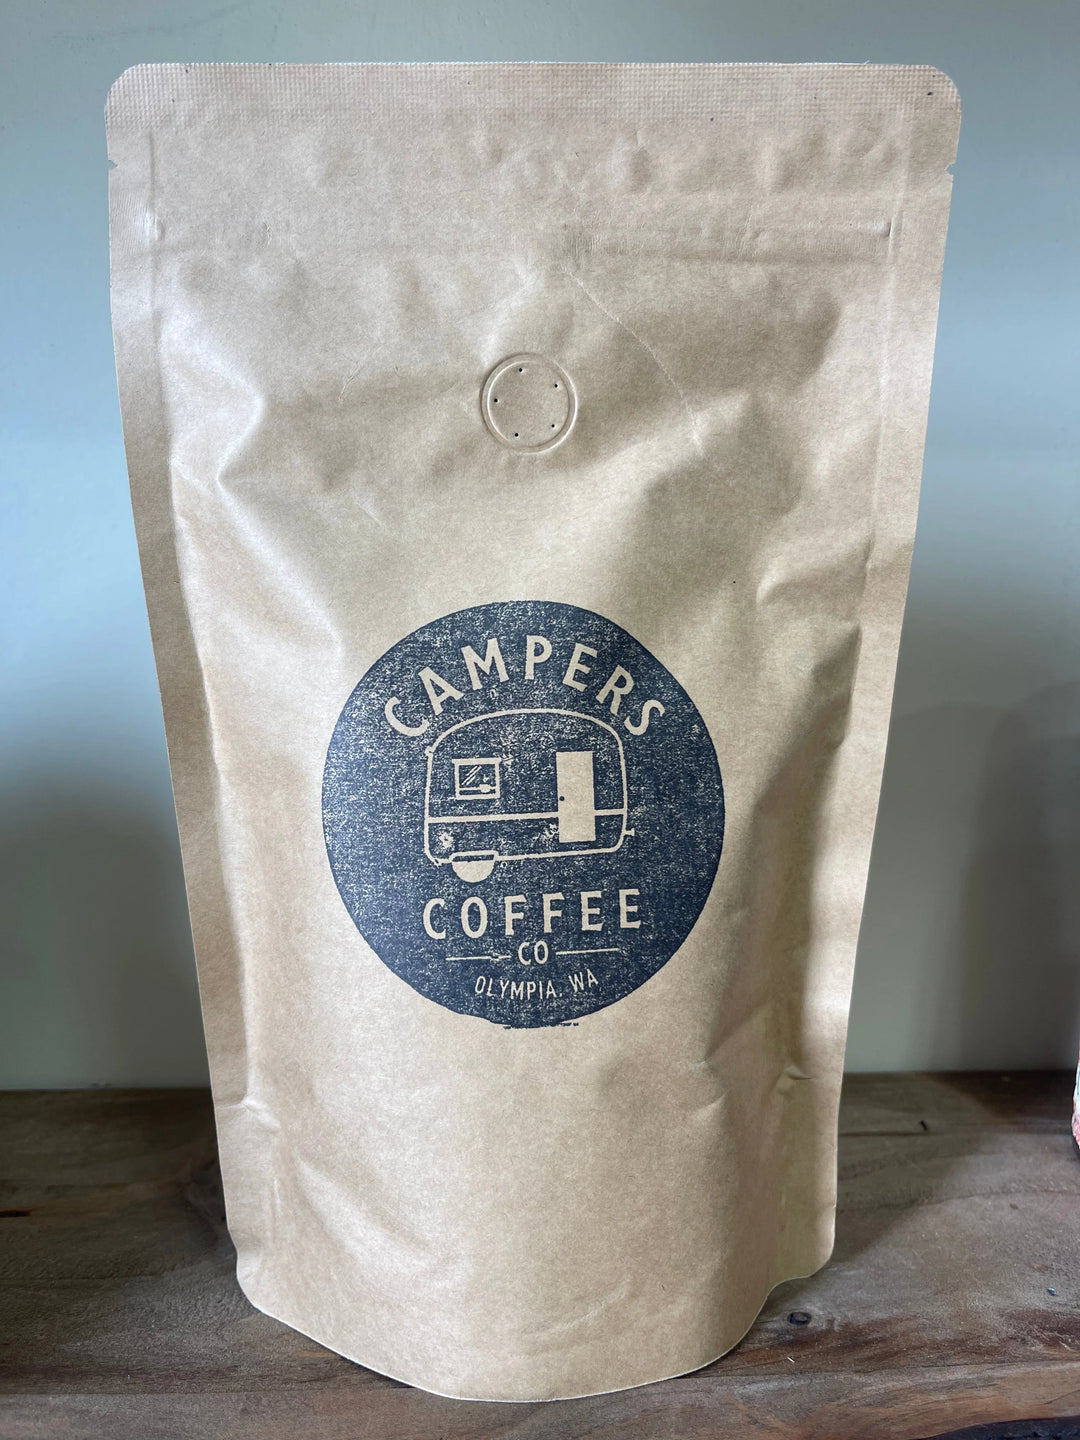 Campers Coffee-Timor 10 oz.